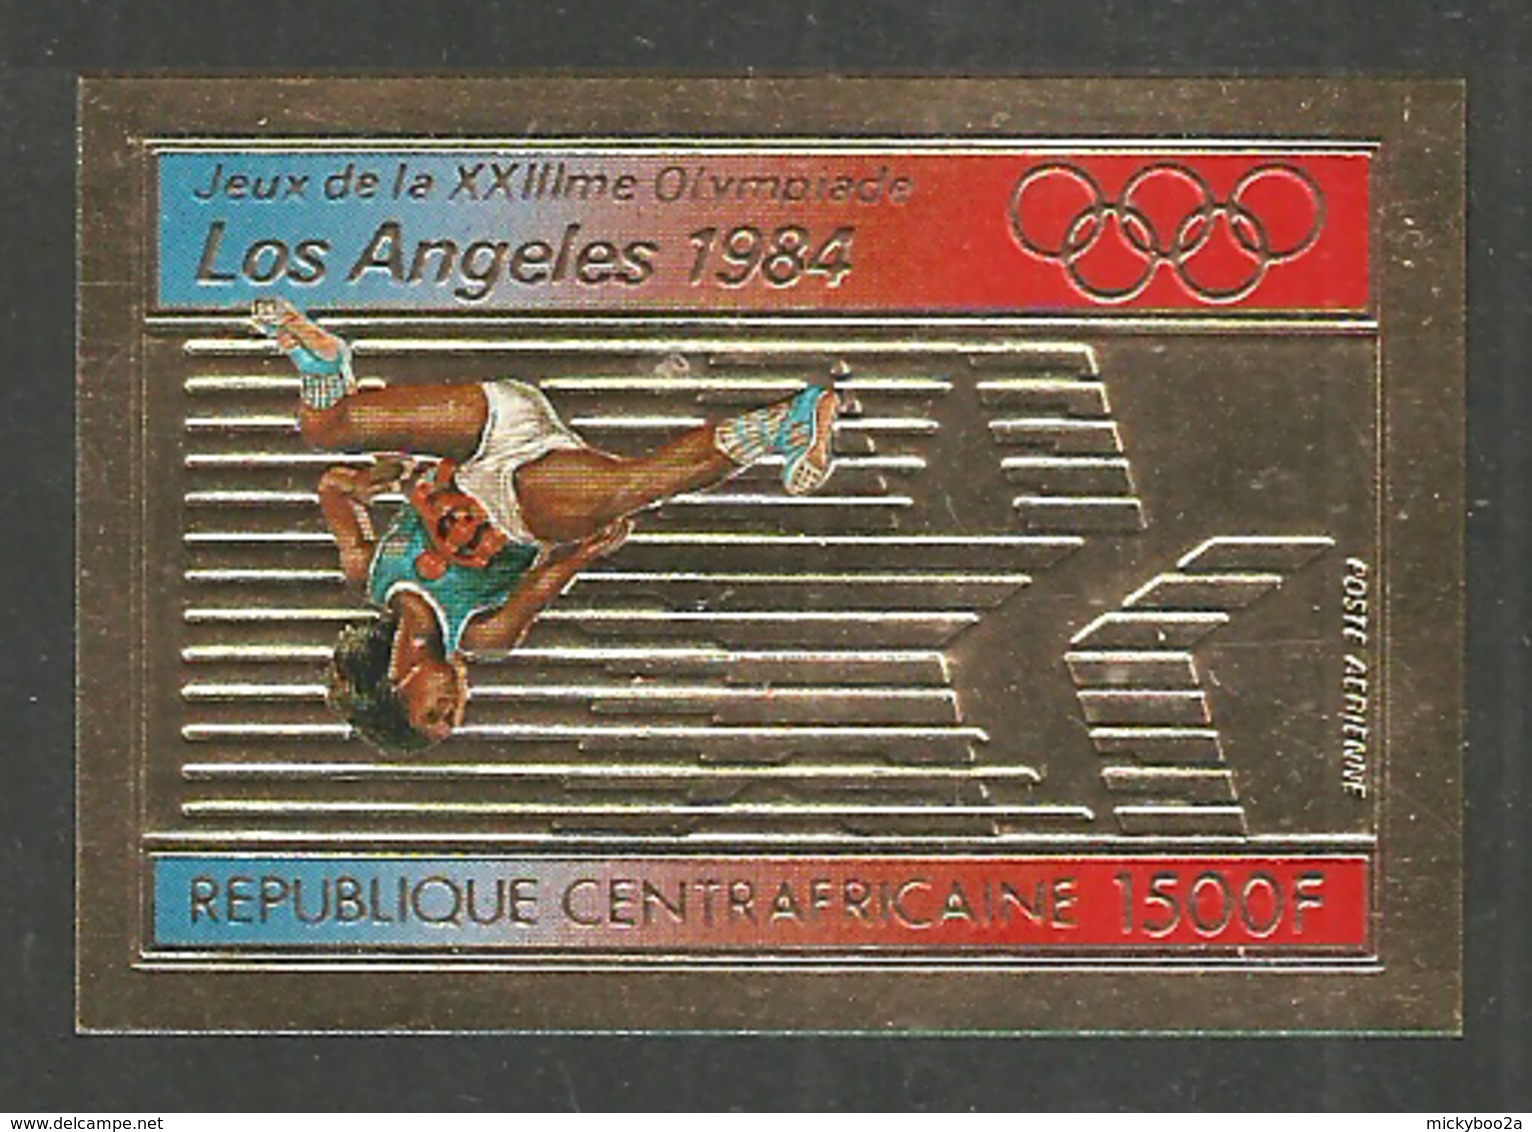 CENTRAL AFRICA 1984 SPORT OLYMPICS LOS ANGELES HIGH JUMP GOLD SET IMPERF MNH - Central African Republic